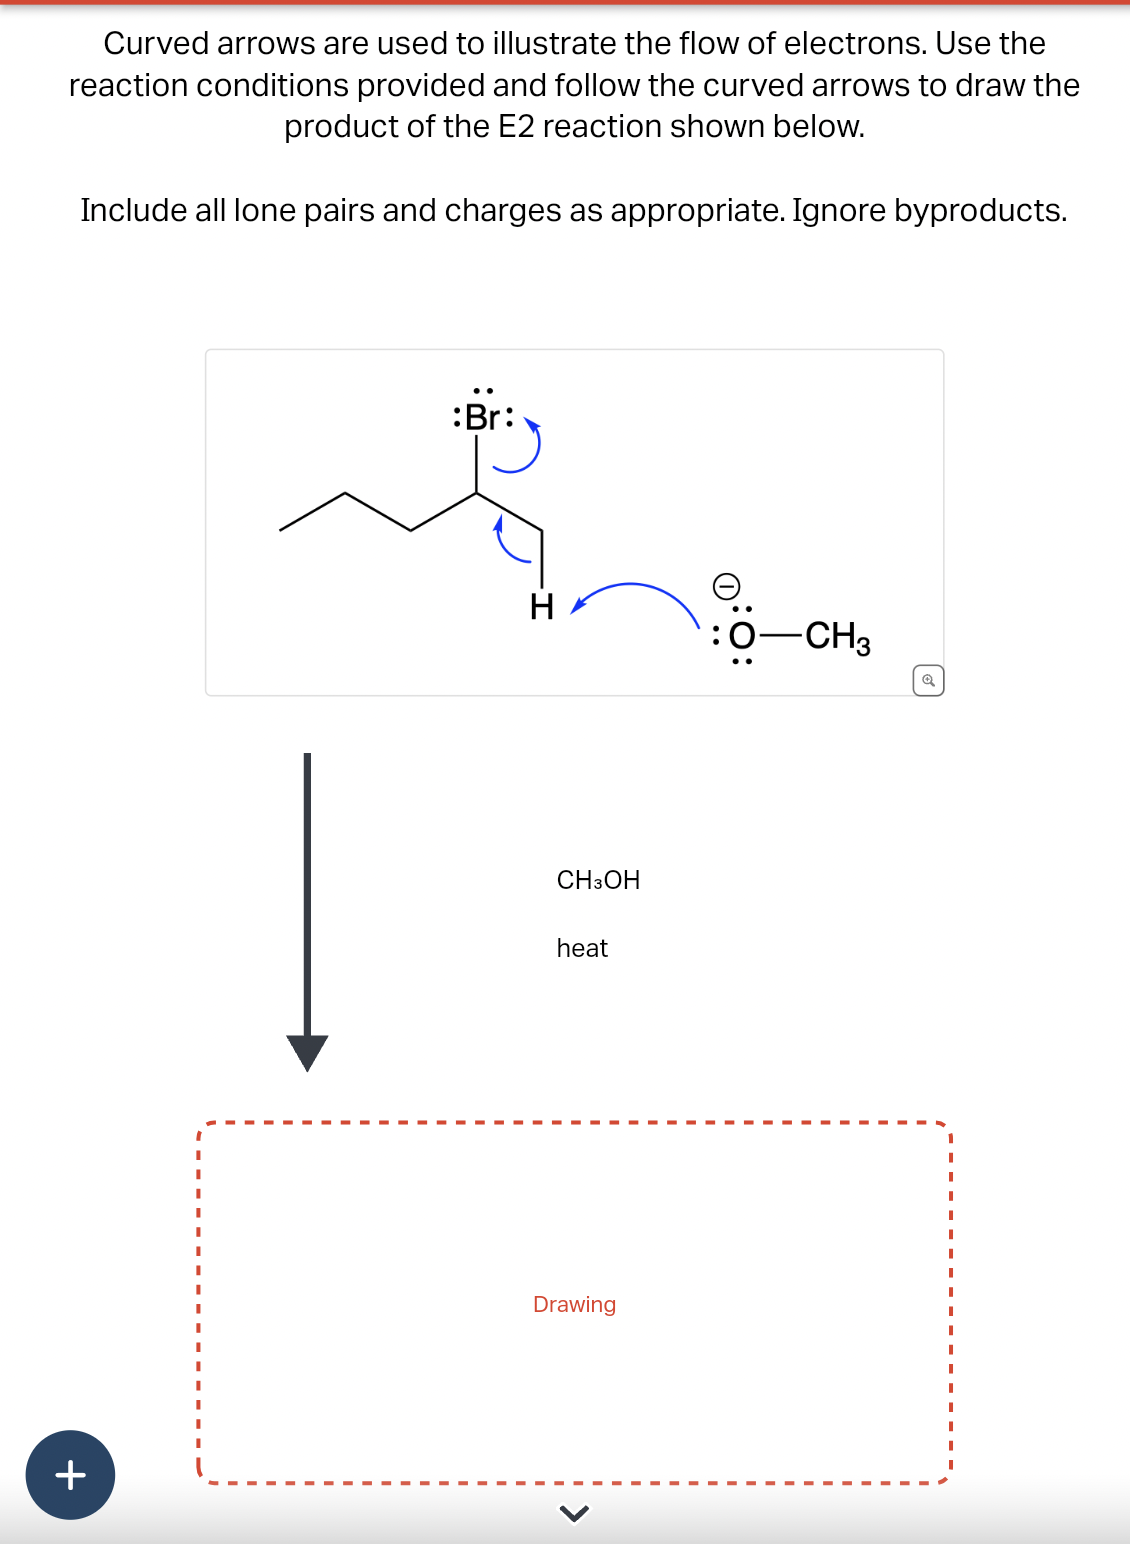 Curved arrows are used to illustrate the flow of electrons. Use the
reaction conditions provided and follow the curved arrows to draw the
product of the E2 reaction shown below.
Include all lone pairs and charges as appropriate. Ignore byproducts.
+
:Br:
H
CH3OH
heat
Drawing
Ө
:0-CH3
Q